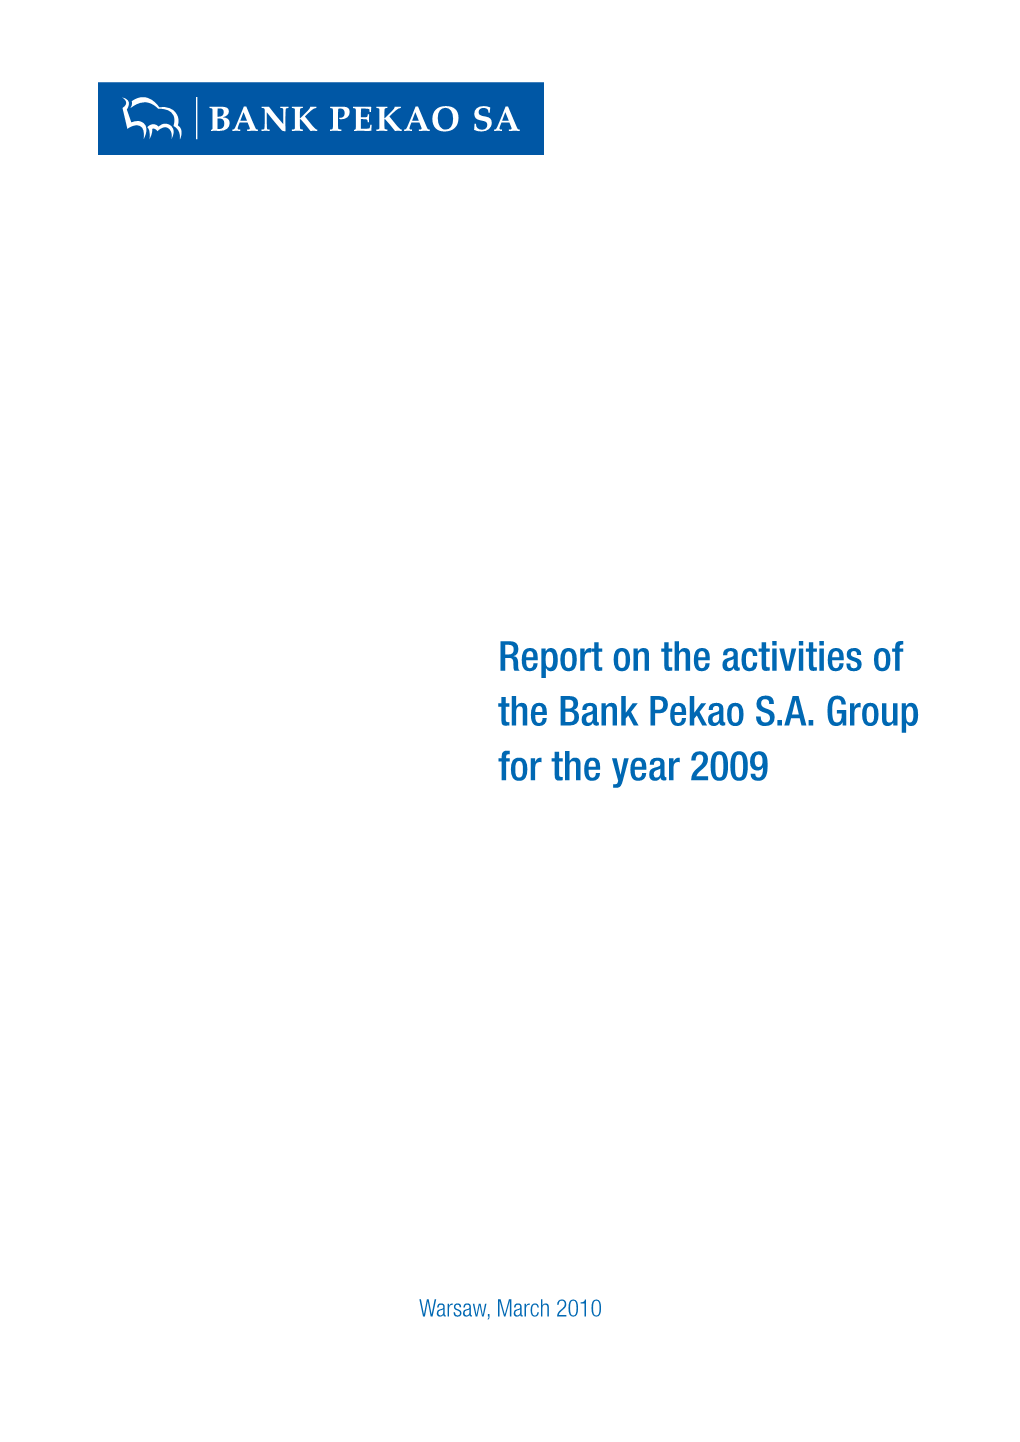 Report on the Activities of the Bank Pekao S.A. Group for the Year 2009